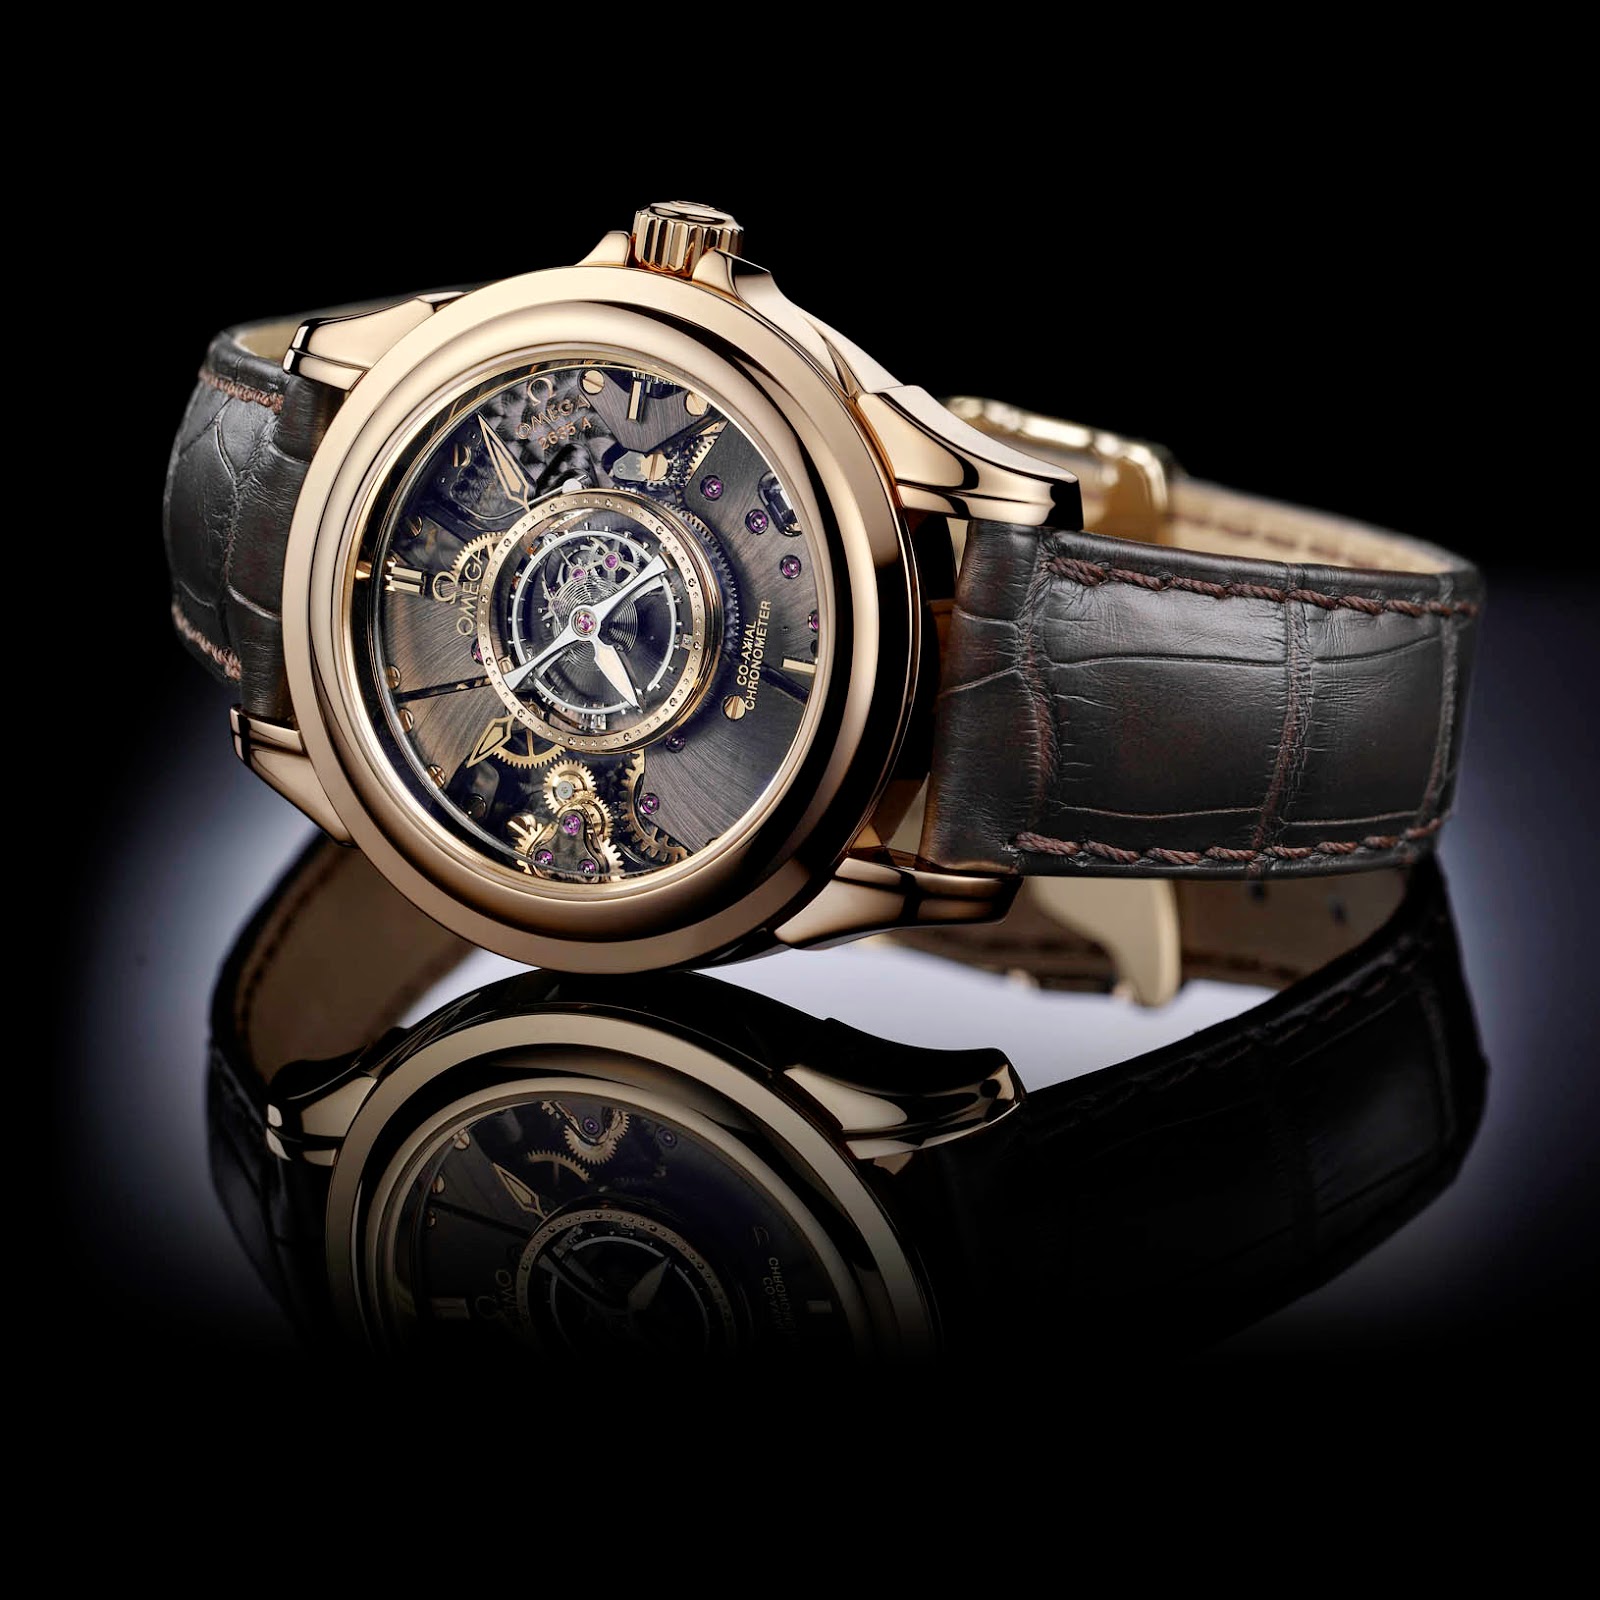 The skeleton dial makes the Swiss copy watch more technological and eye-catching.